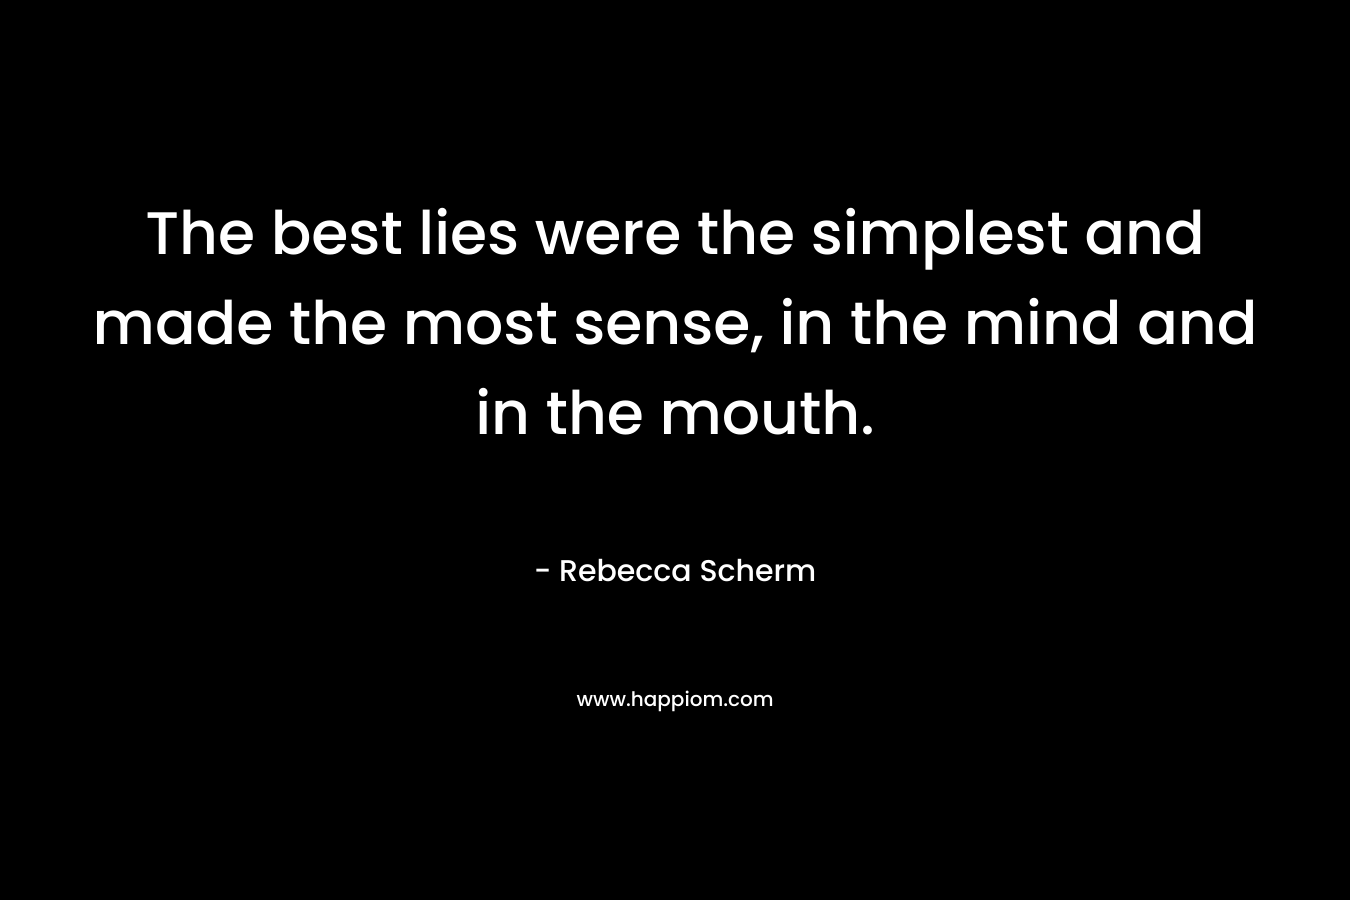 The best lies were the simplest and made the most sense, in the mind and in the mouth. – Rebecca Scherm